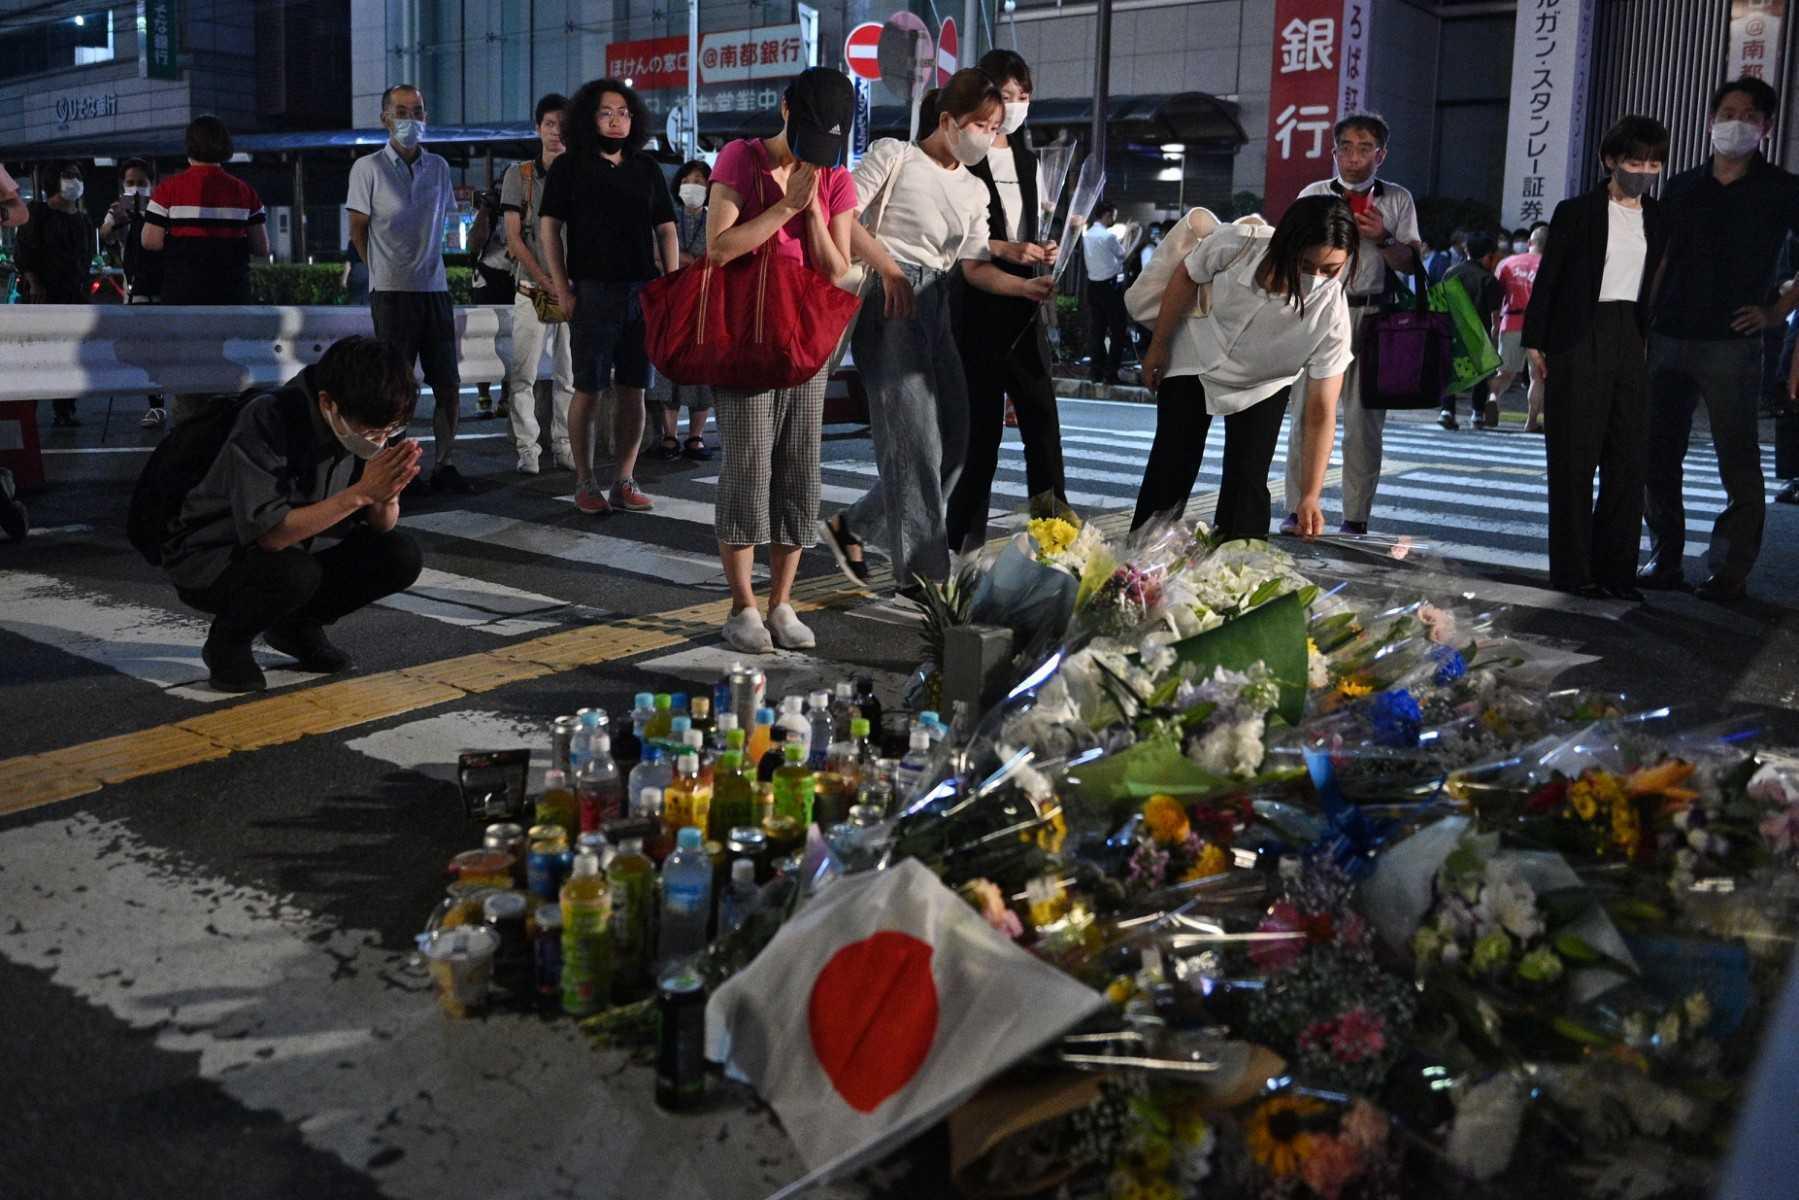 People pay their respects in front of a makeshift memorial outside Yamato-Saidaiji Station, where former Japanese prime minister Shinzo Abe was shot earlier in the day, in Nara on July 8. Photo: AFP